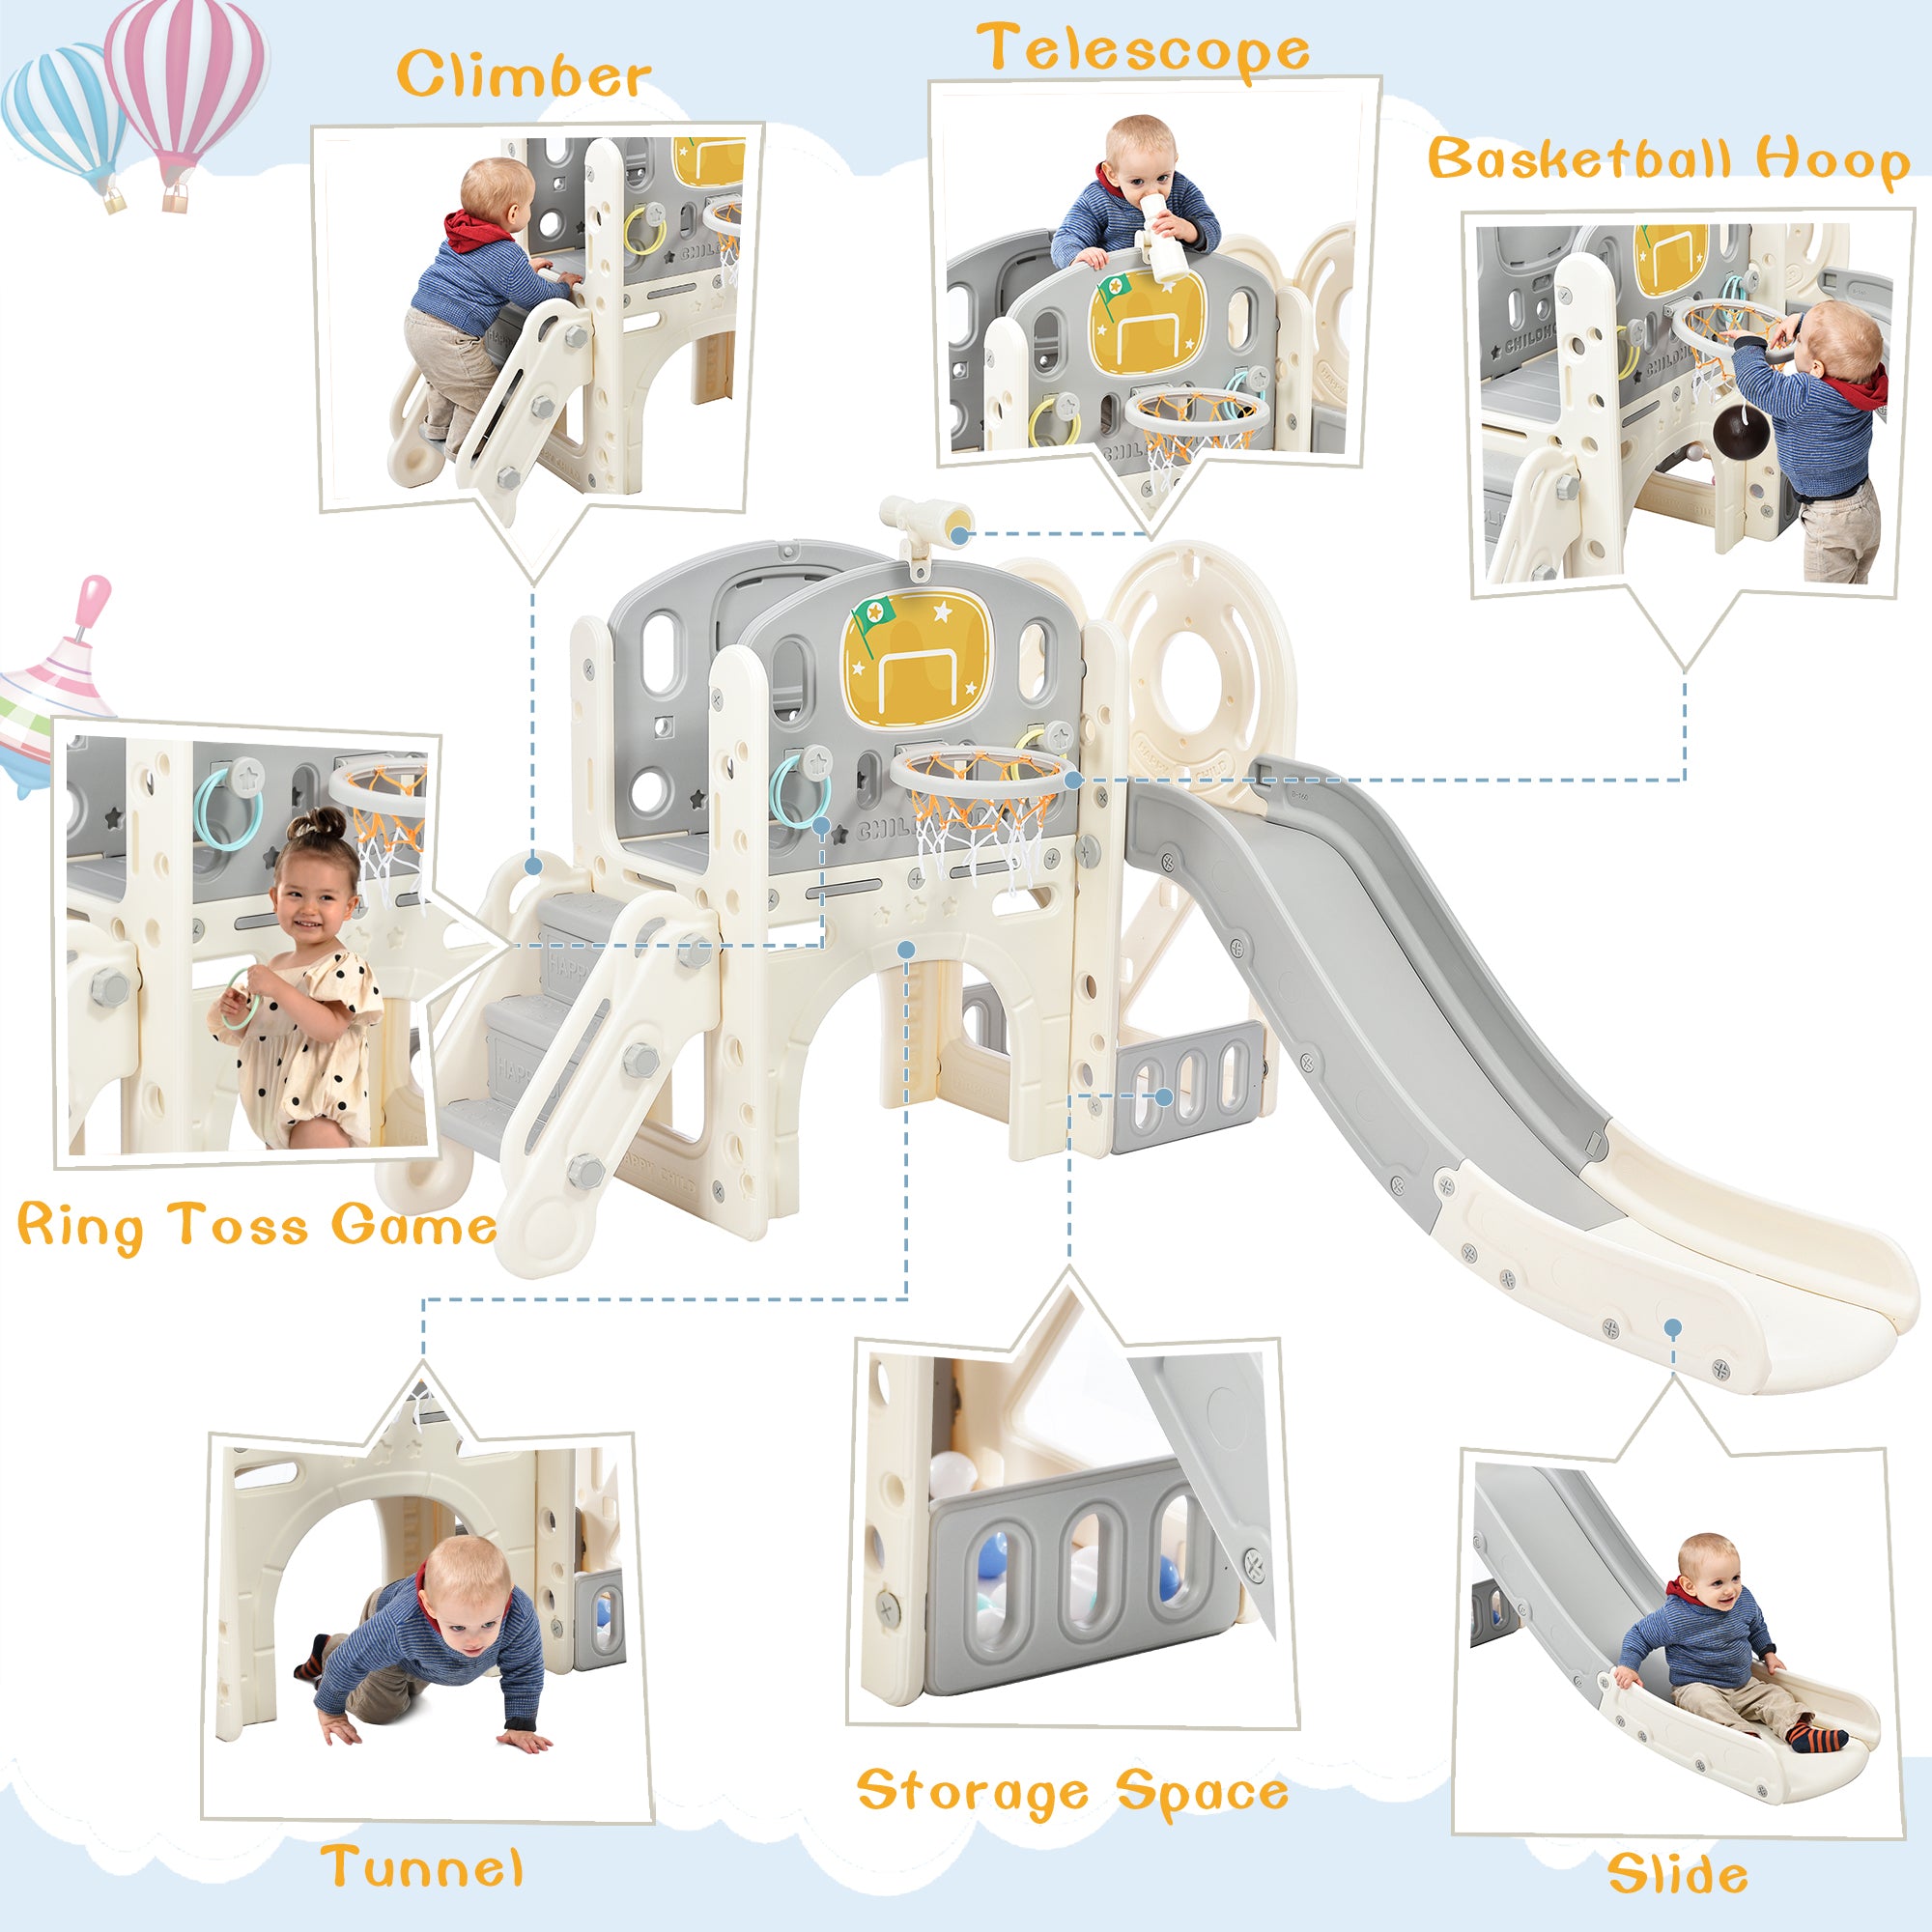 🆓🚛 Kids Slide Playset Structure, Freestanding Castle Climbing Crawling Playhouse With Slide, Arch Tunnel, Ring Toss, & Basketball Hoop, Toy Storage Organizer for Toddlers, Kids Climbers Playground, Gray & White